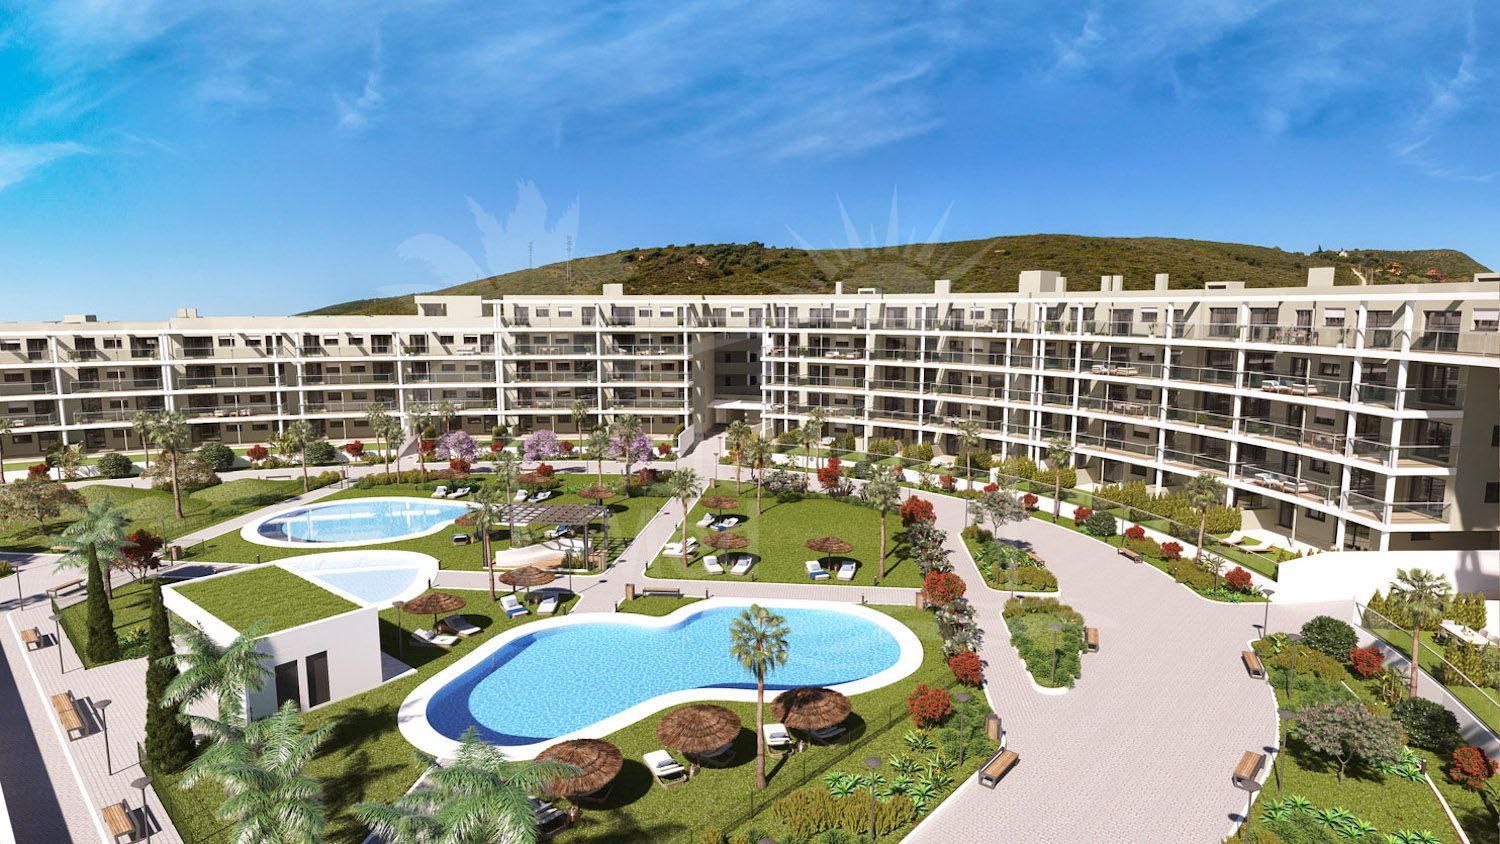 Off Plan development of 2 and 3 bedroom Apartments, Walking Distance to the Beach in Manilva.